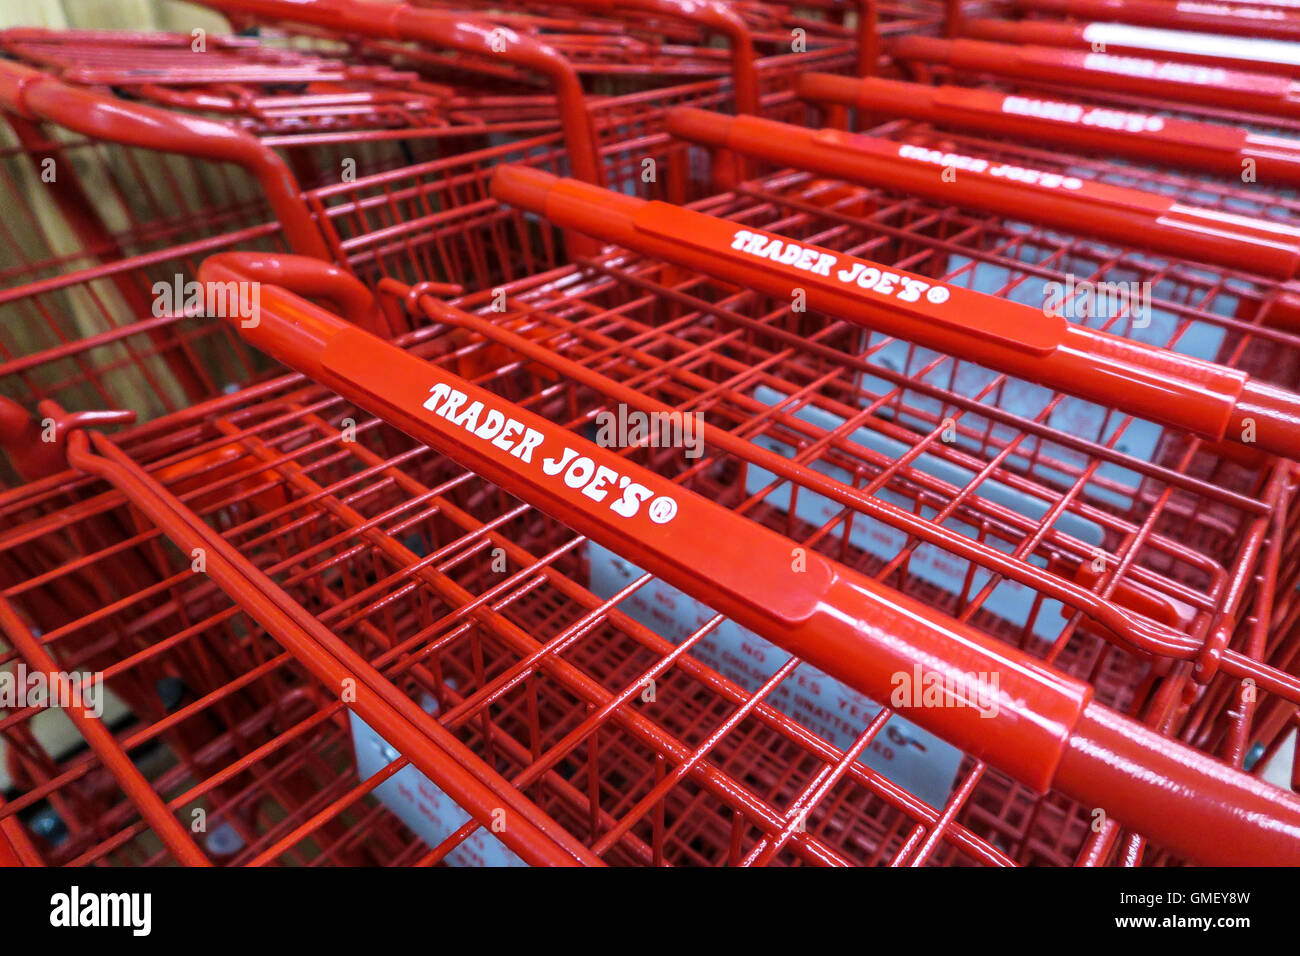 Row of shopping Carts, Trader Joe's Specialty Grocery Store, NYC Stock Photo